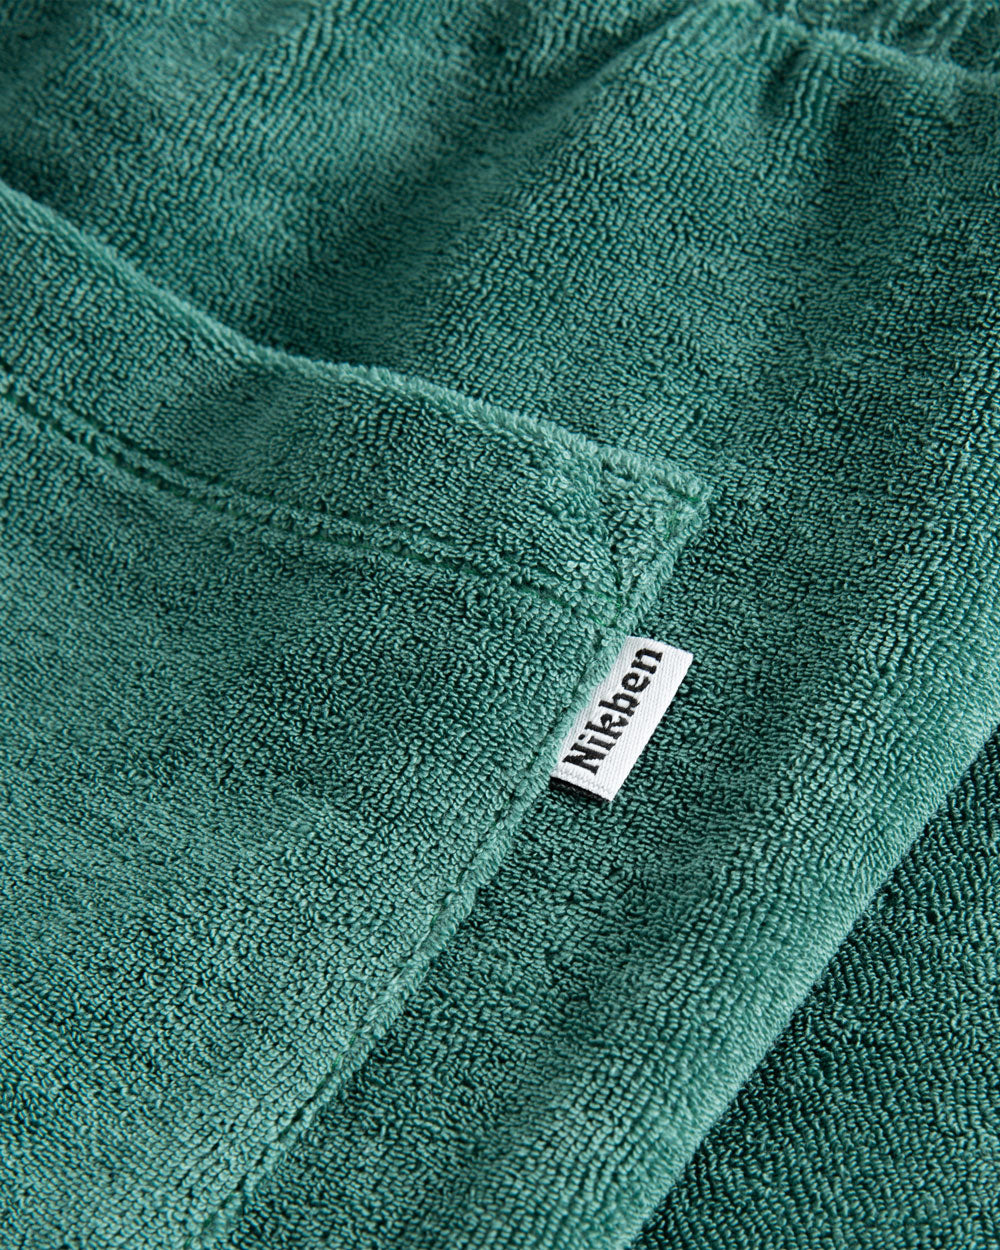 Label on green shorts in Terry toweling fabric